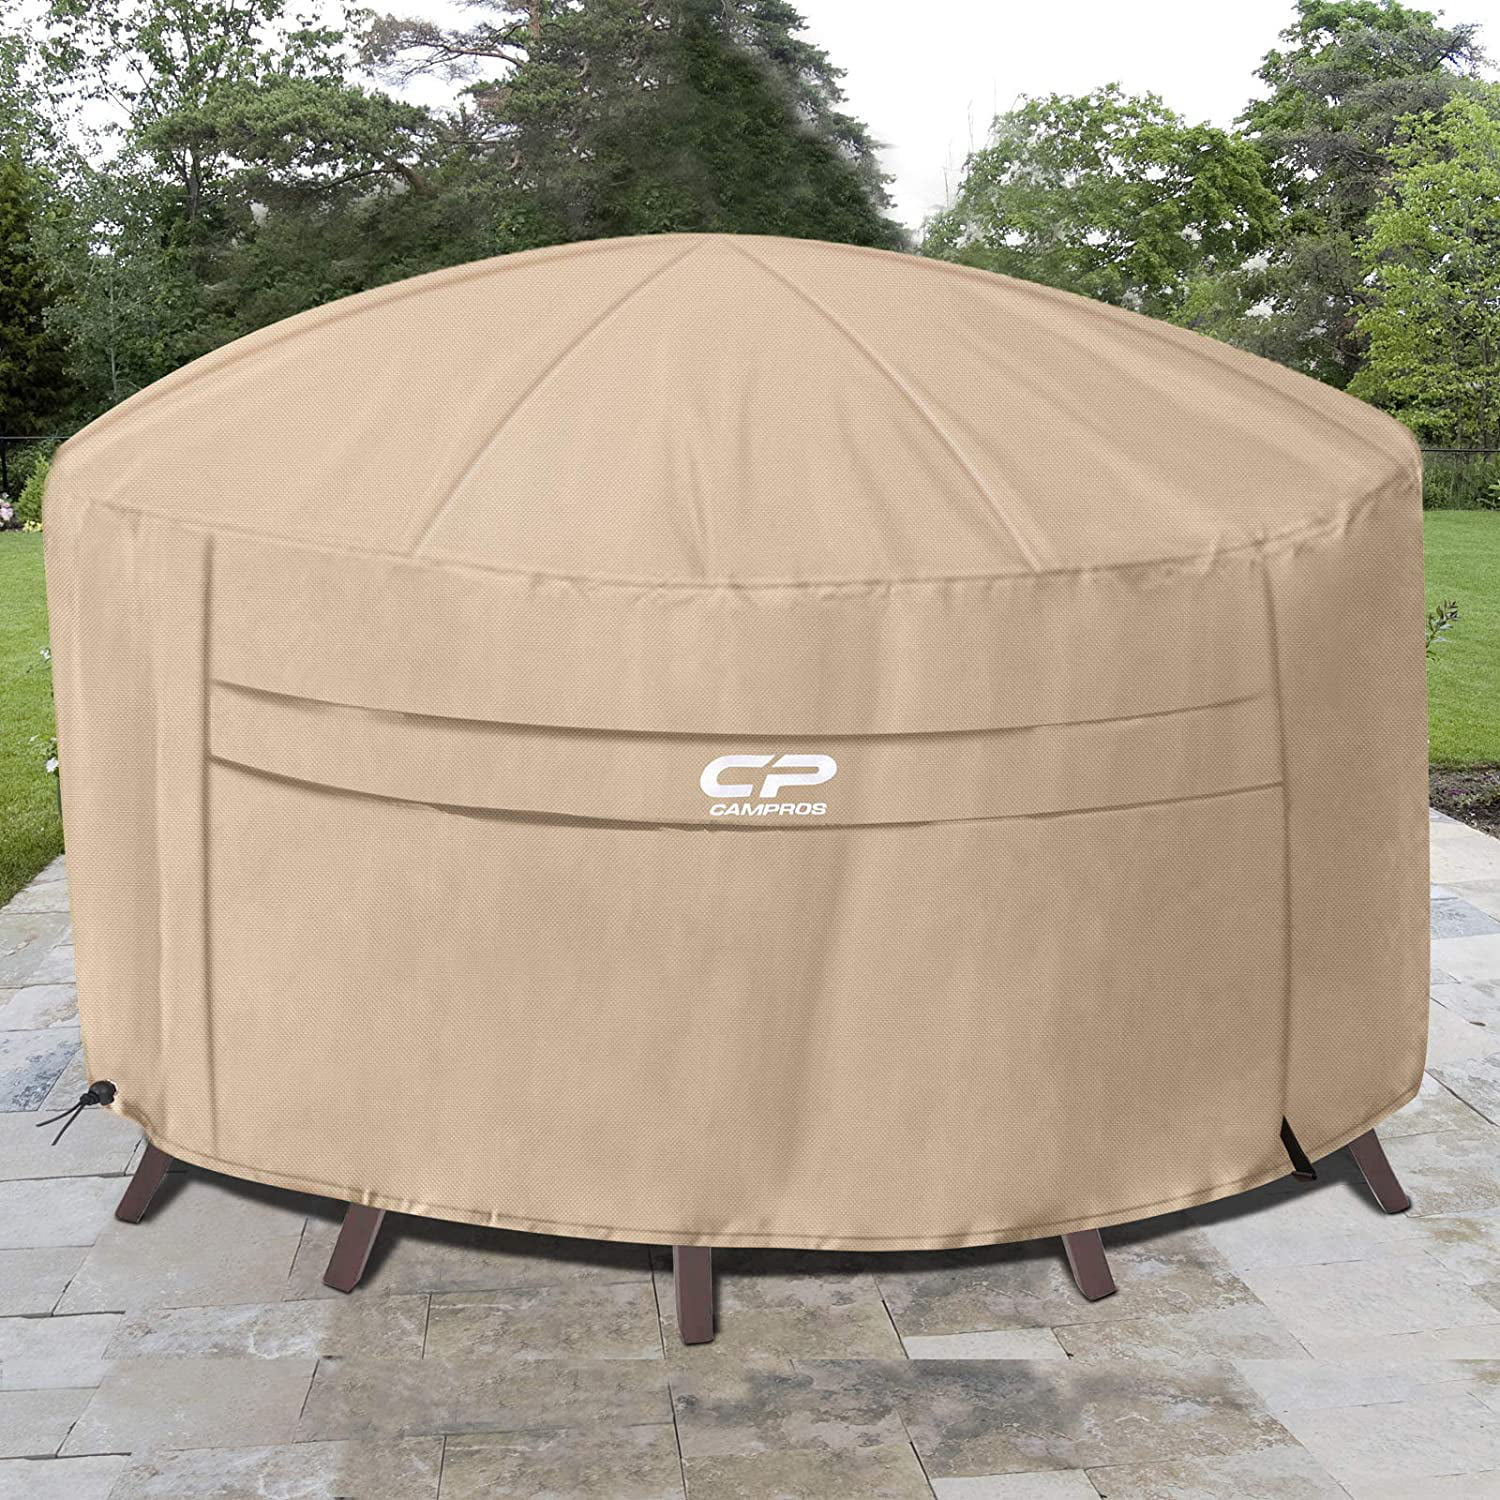 Waterproof Outdoor Table Chair Set Covers Beige CAMPROS Round Patio Furniture Cover with Roof Pole 84 Dia x 50 H UV Resistant Fade Resistant Cover for Outdoor Furniture Set 